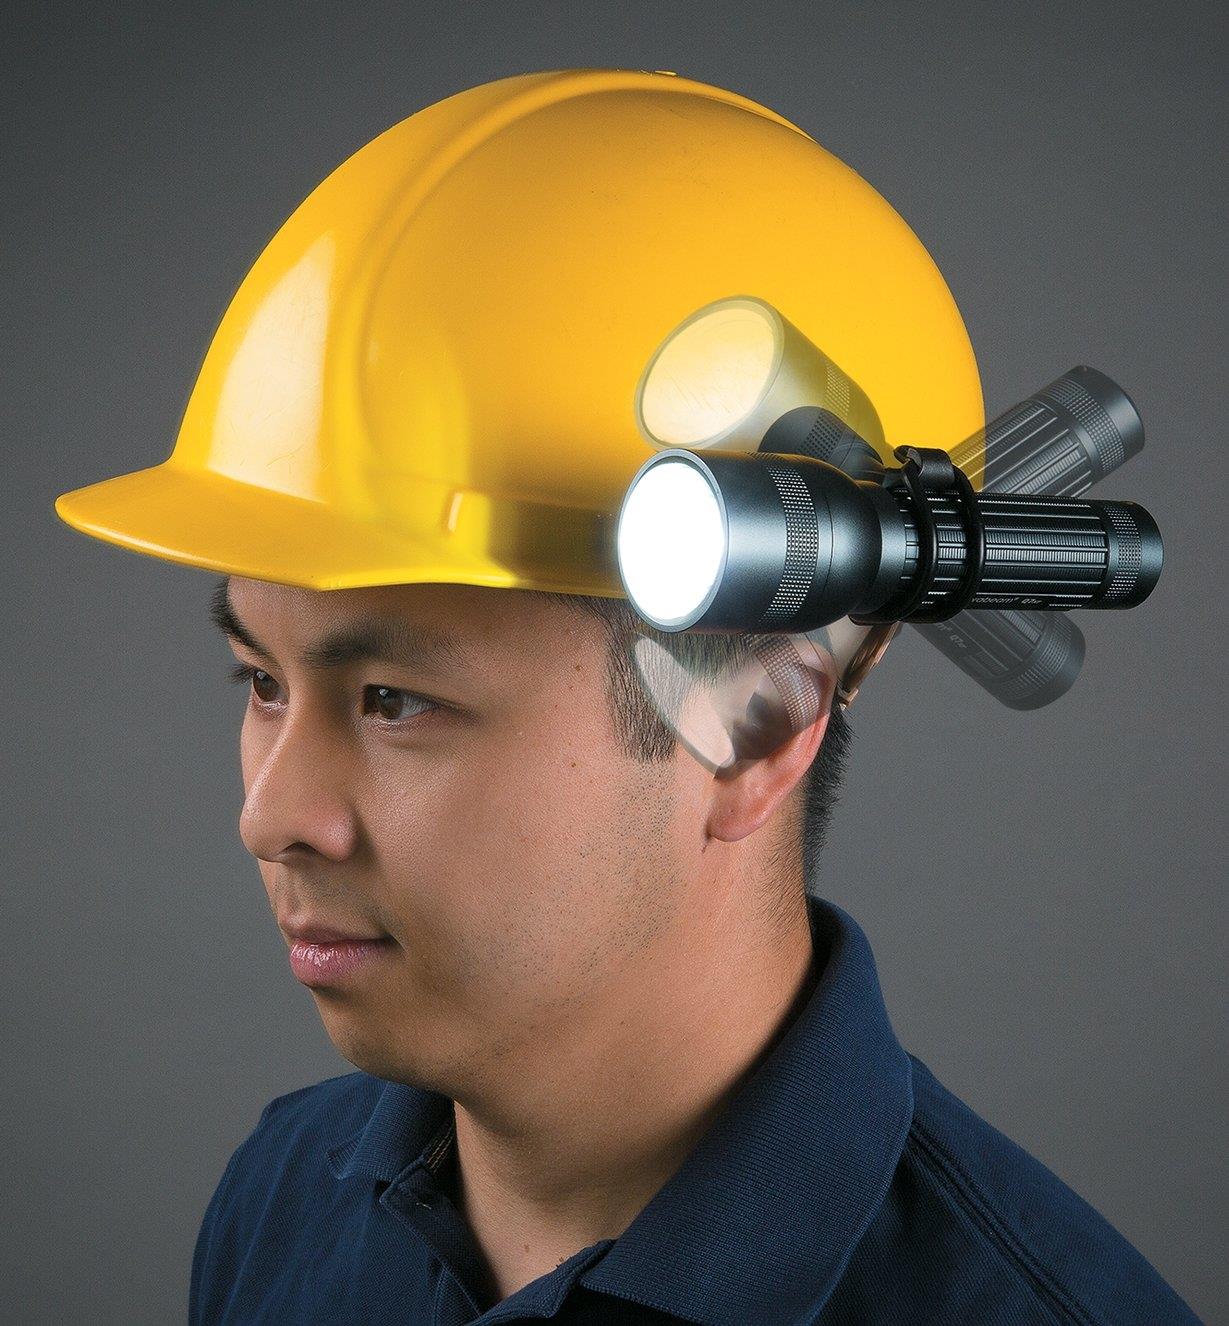 Ghosted image of a man wearing a hard hat with a flashlight held in various positions